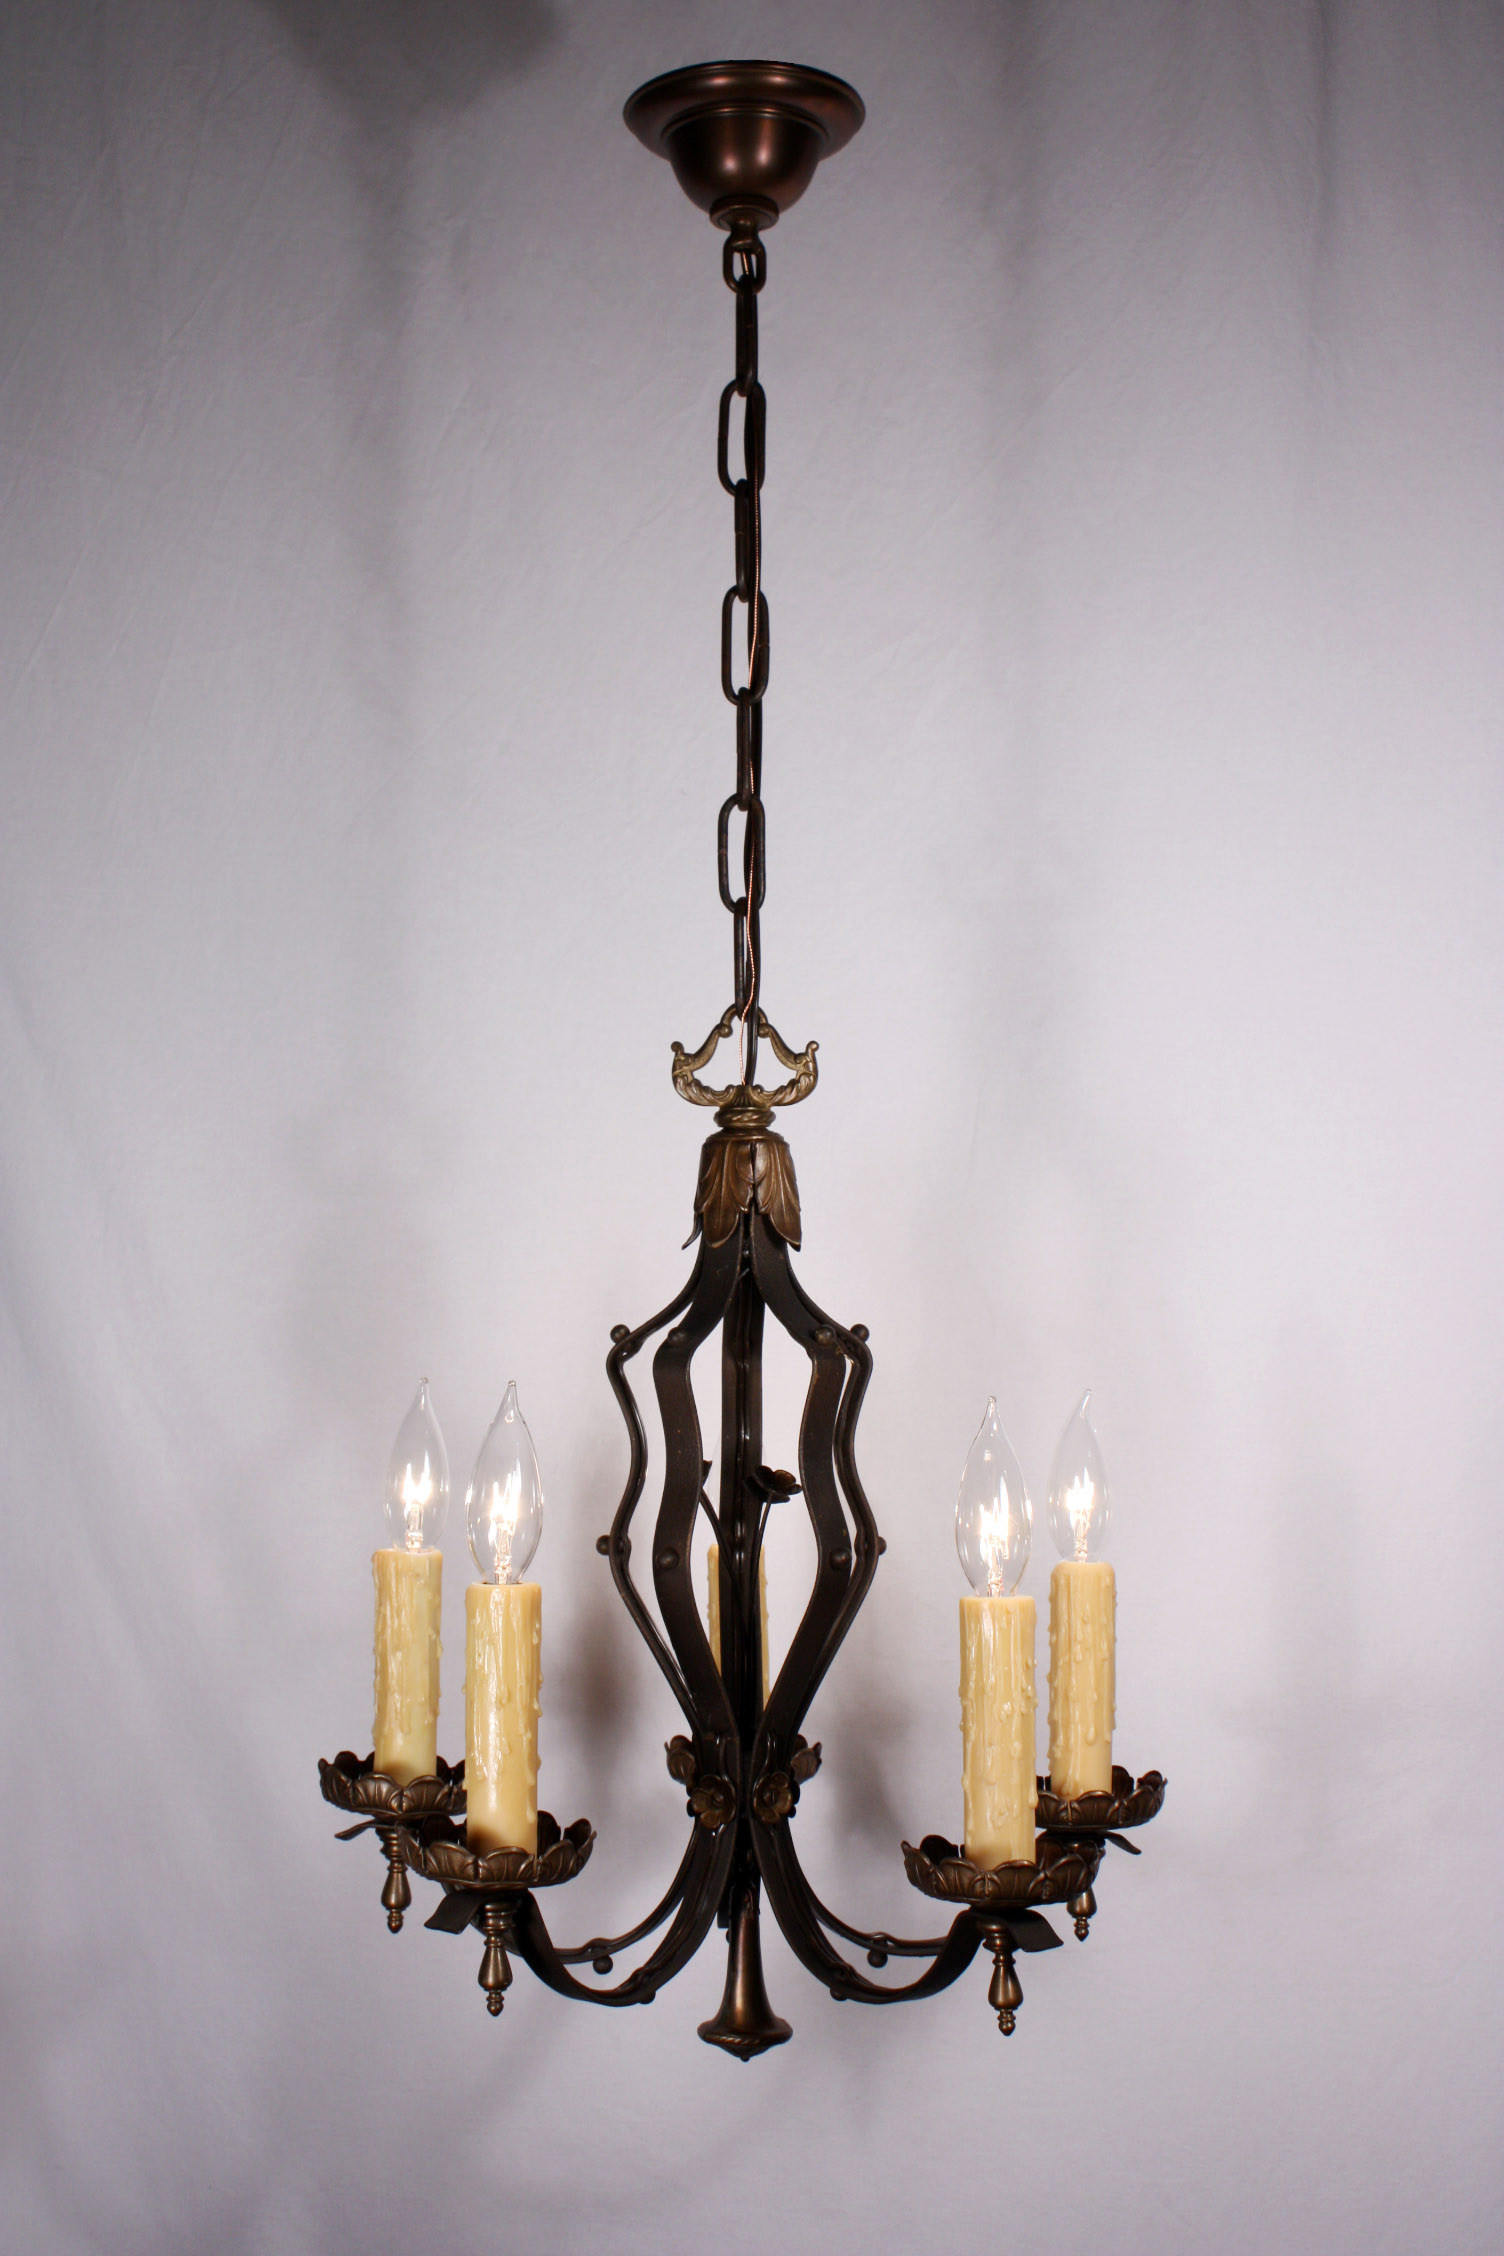 SOLD Beautiful Antique Five-Light Neoclassical Chandelier, Iron & Brass-18654